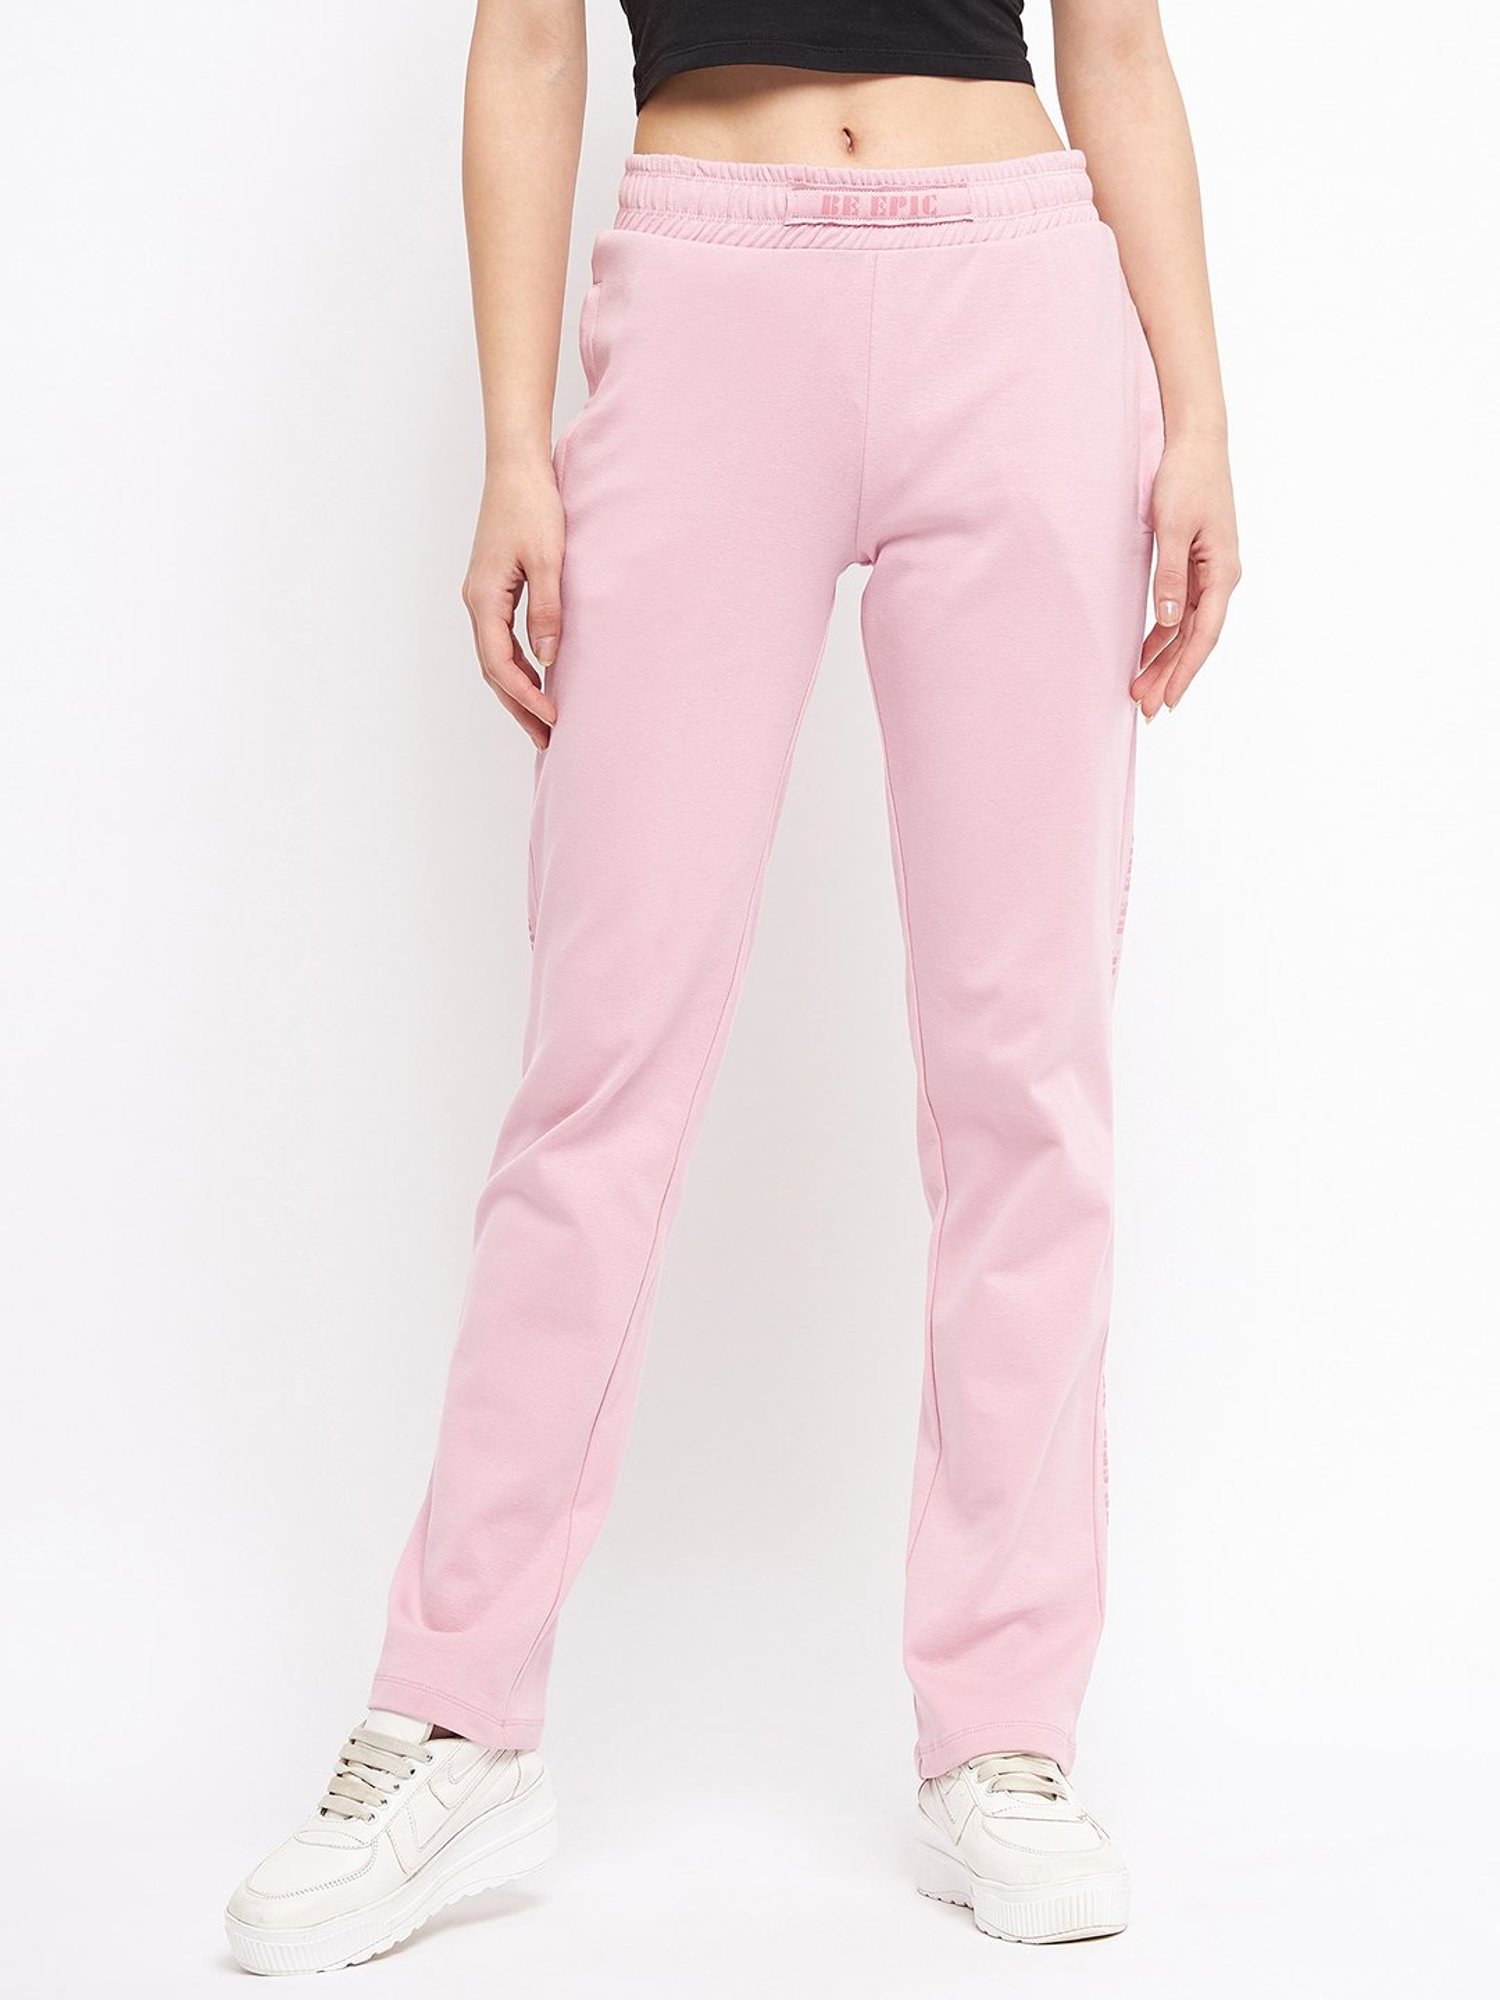 DYCA Girls Cotton Regular Fit Track Pant  Online Shopping site in India